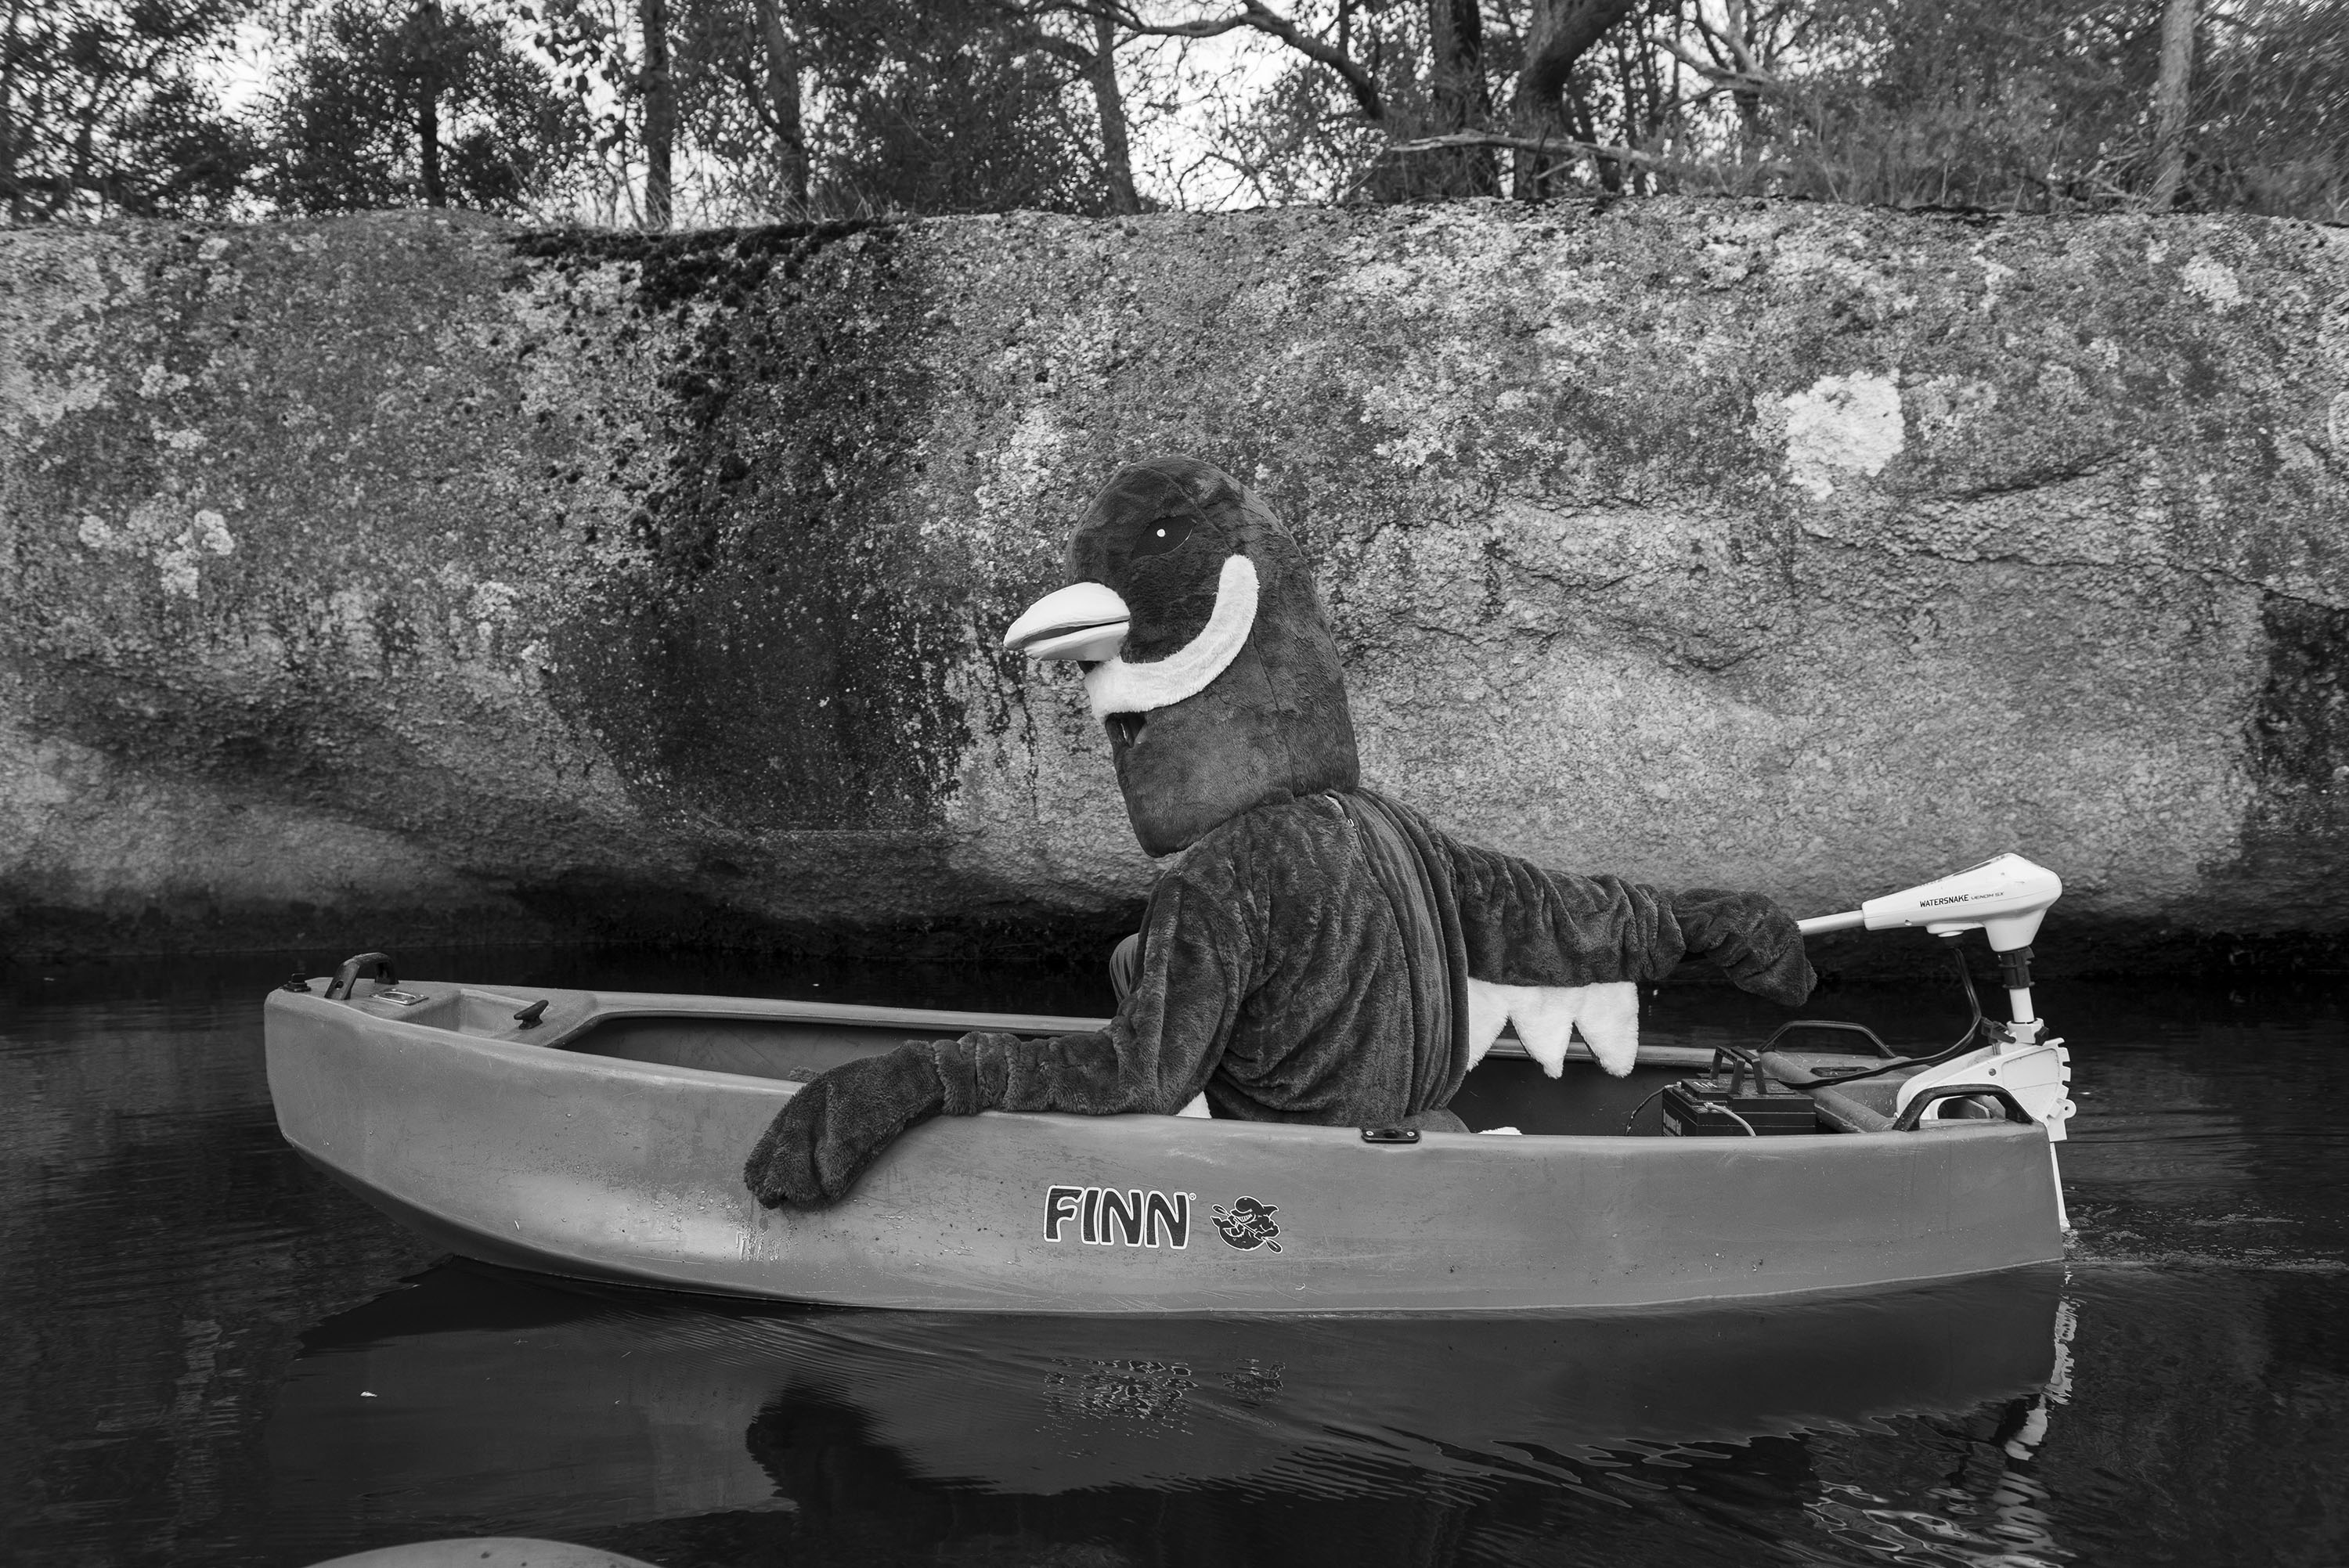 A person dressed in a "goose" mascot costume rides in a boat on a river.